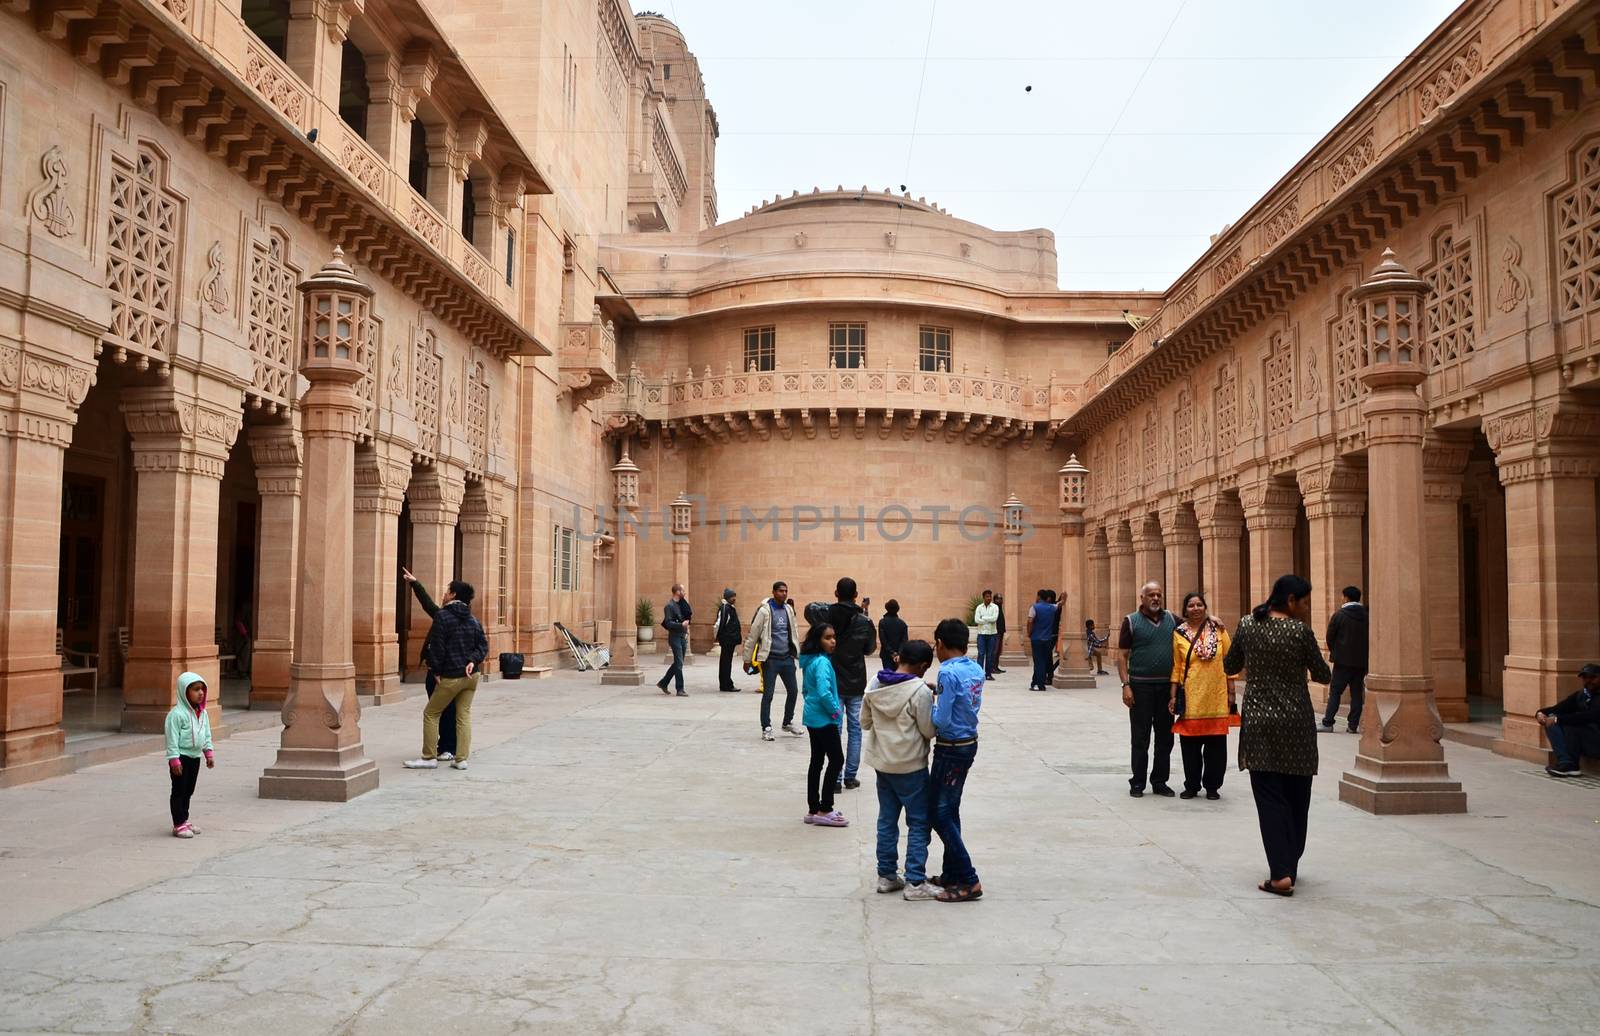 Jodhpur, India - January 1, 2015: Tourist visit Umaid Bhawan Palace on January 1, 2015, Umaid Bhawan located at Jodhpur in Rajasthan, India, is one of the world's largest private residences.